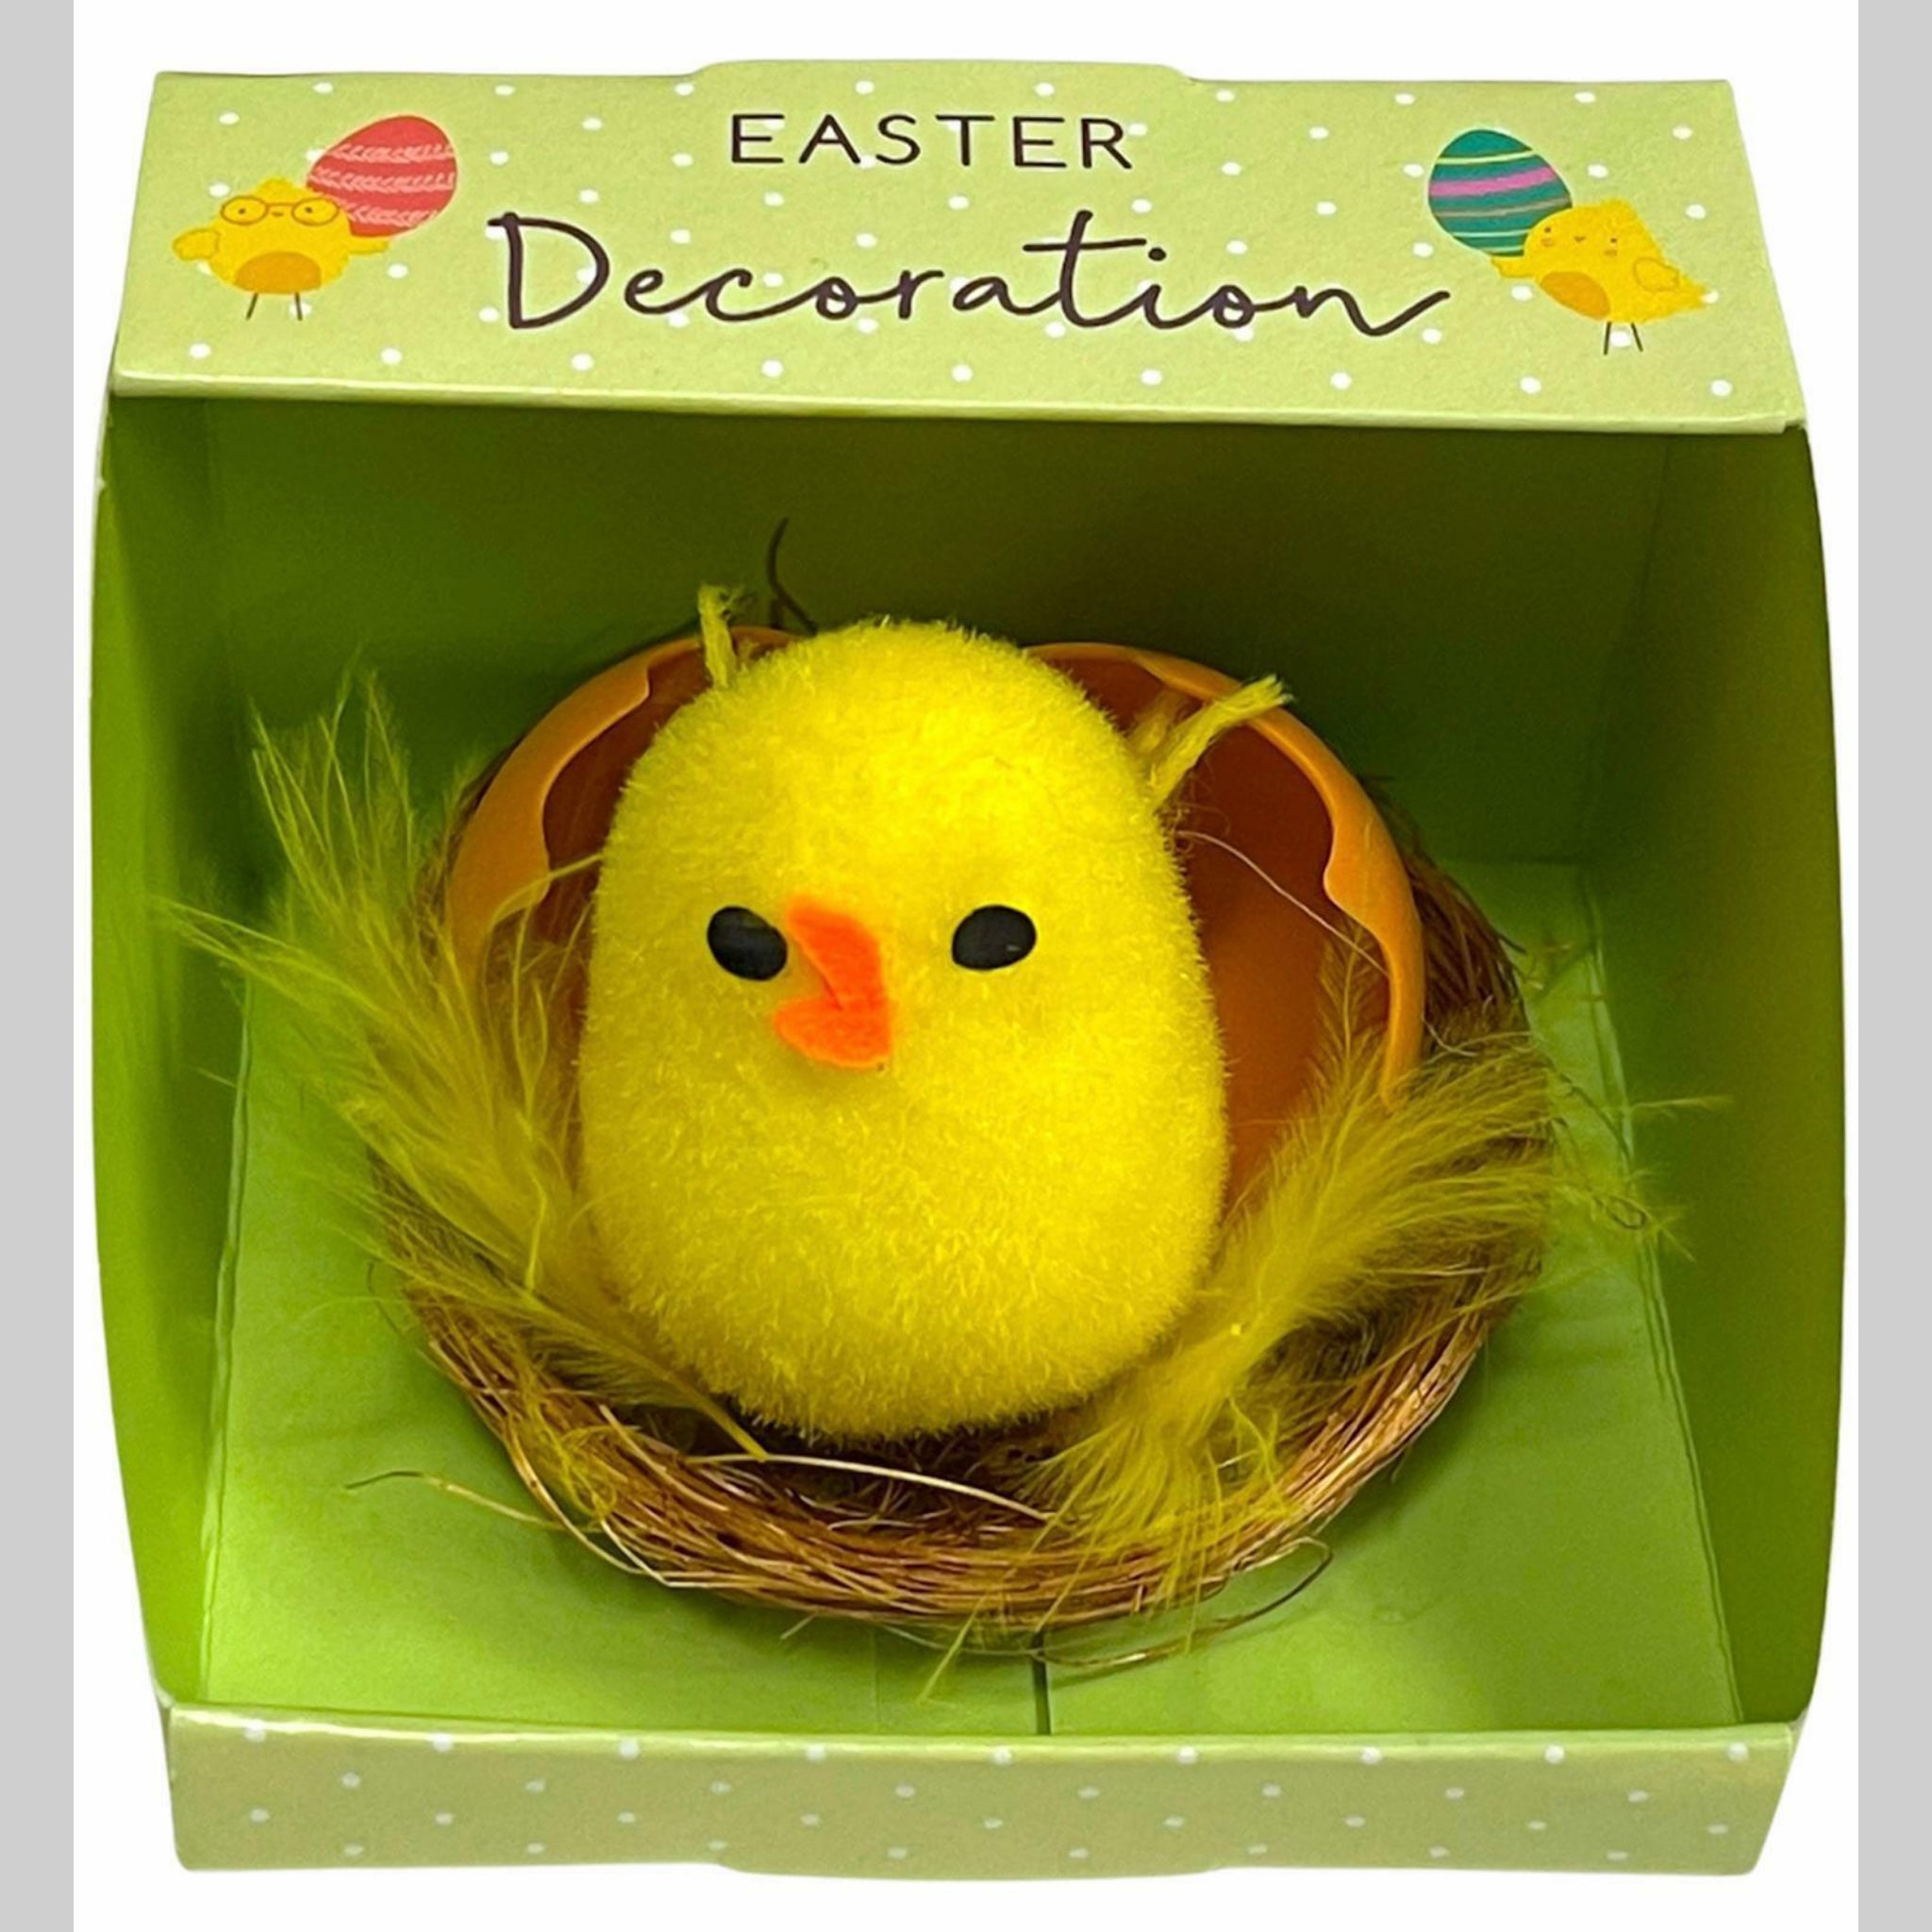 Beclen Harp 4 Pack Artificial Easter Egg With Mini Nest/Hatching Chicks Decoration-Perfect For Easter Gift